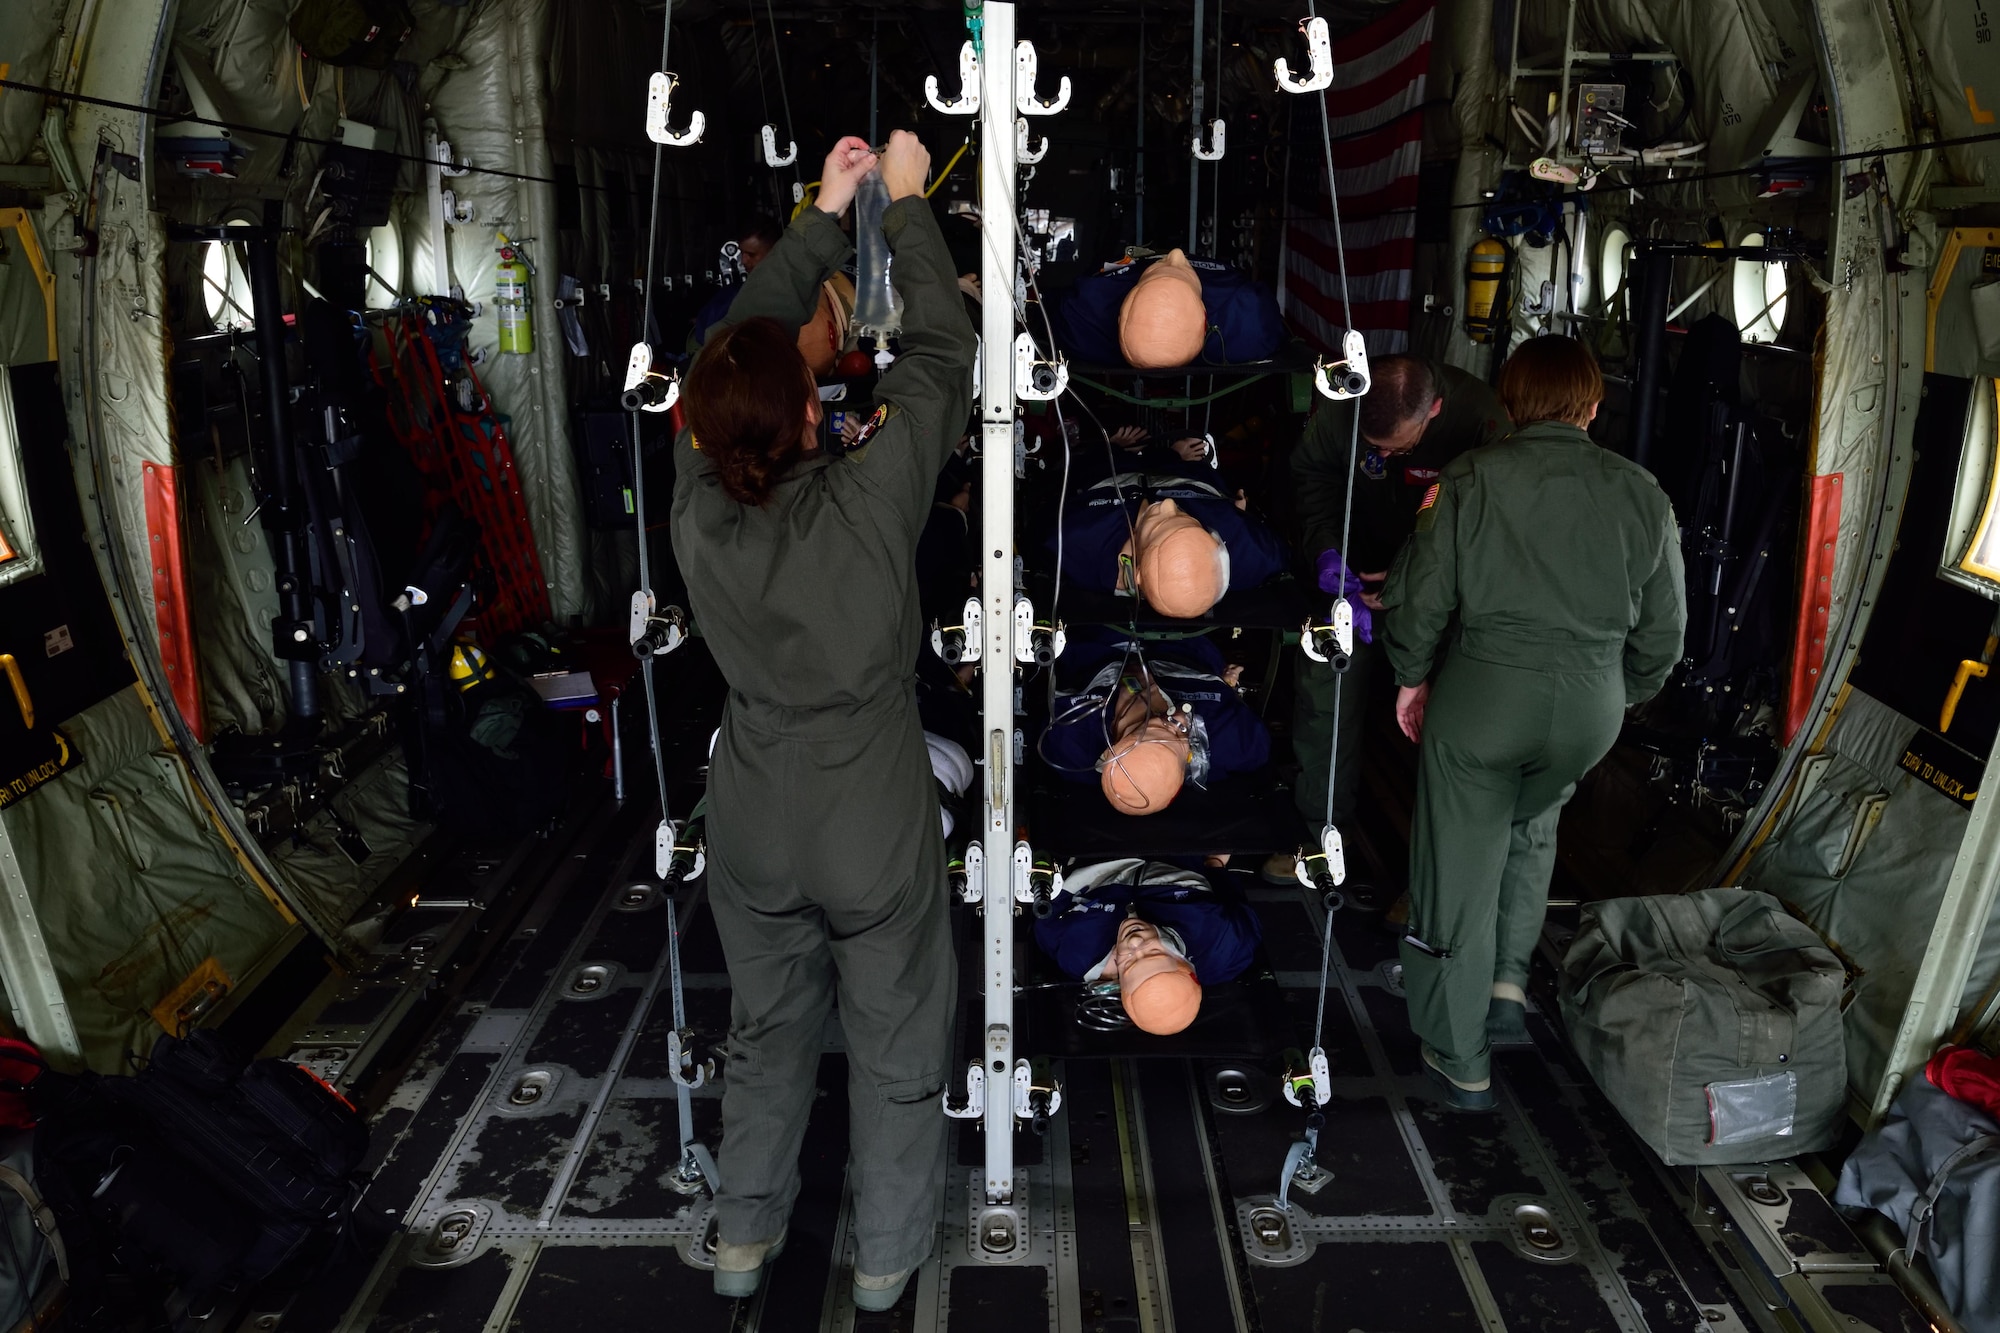 Members from various aeromedical evacuation squadrons secure simulated patients on an 815th Airlift Squadron C-130 Super Hercules aircraft at the Gulfport Combat Readiness Training Center, Mississippi, during an aeromedical evacuation exercise Nov. 1, 2017, for Southern Strike 2018. Southern Strike 2018 is a large-scale, joint multinational combat exercise that provides tactical level training for the full spectrum of conflict and emphasizes air dominance, maritime operations, maritime air support, precision engagement, close air support, command and control, personnel recovery, aeromedical evacuation, and combat medical support. (U.S. Air Force photo by Tech. Sgt. Ryan Labadens)